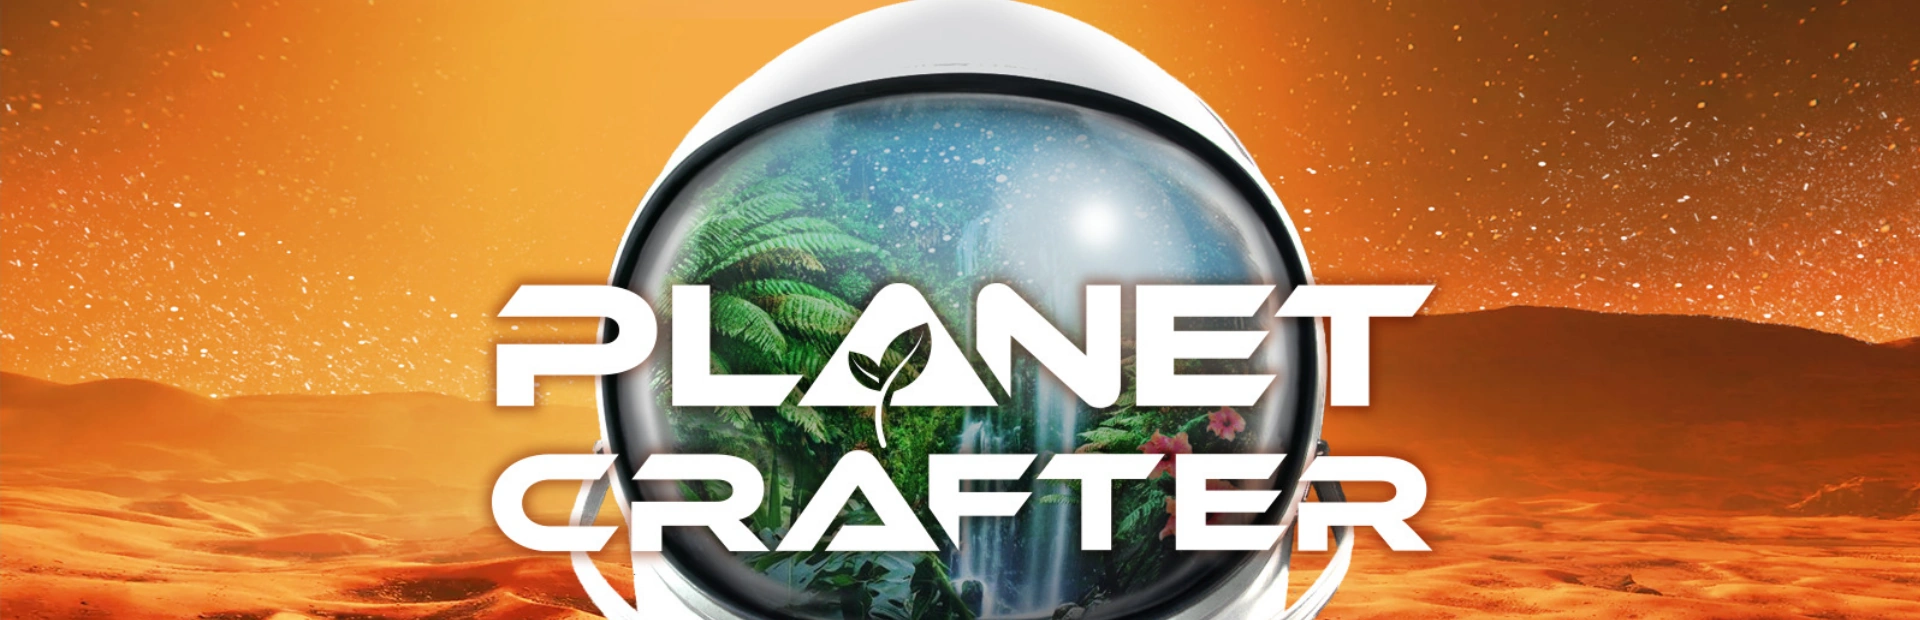 The.Planet.Crafter.banner1